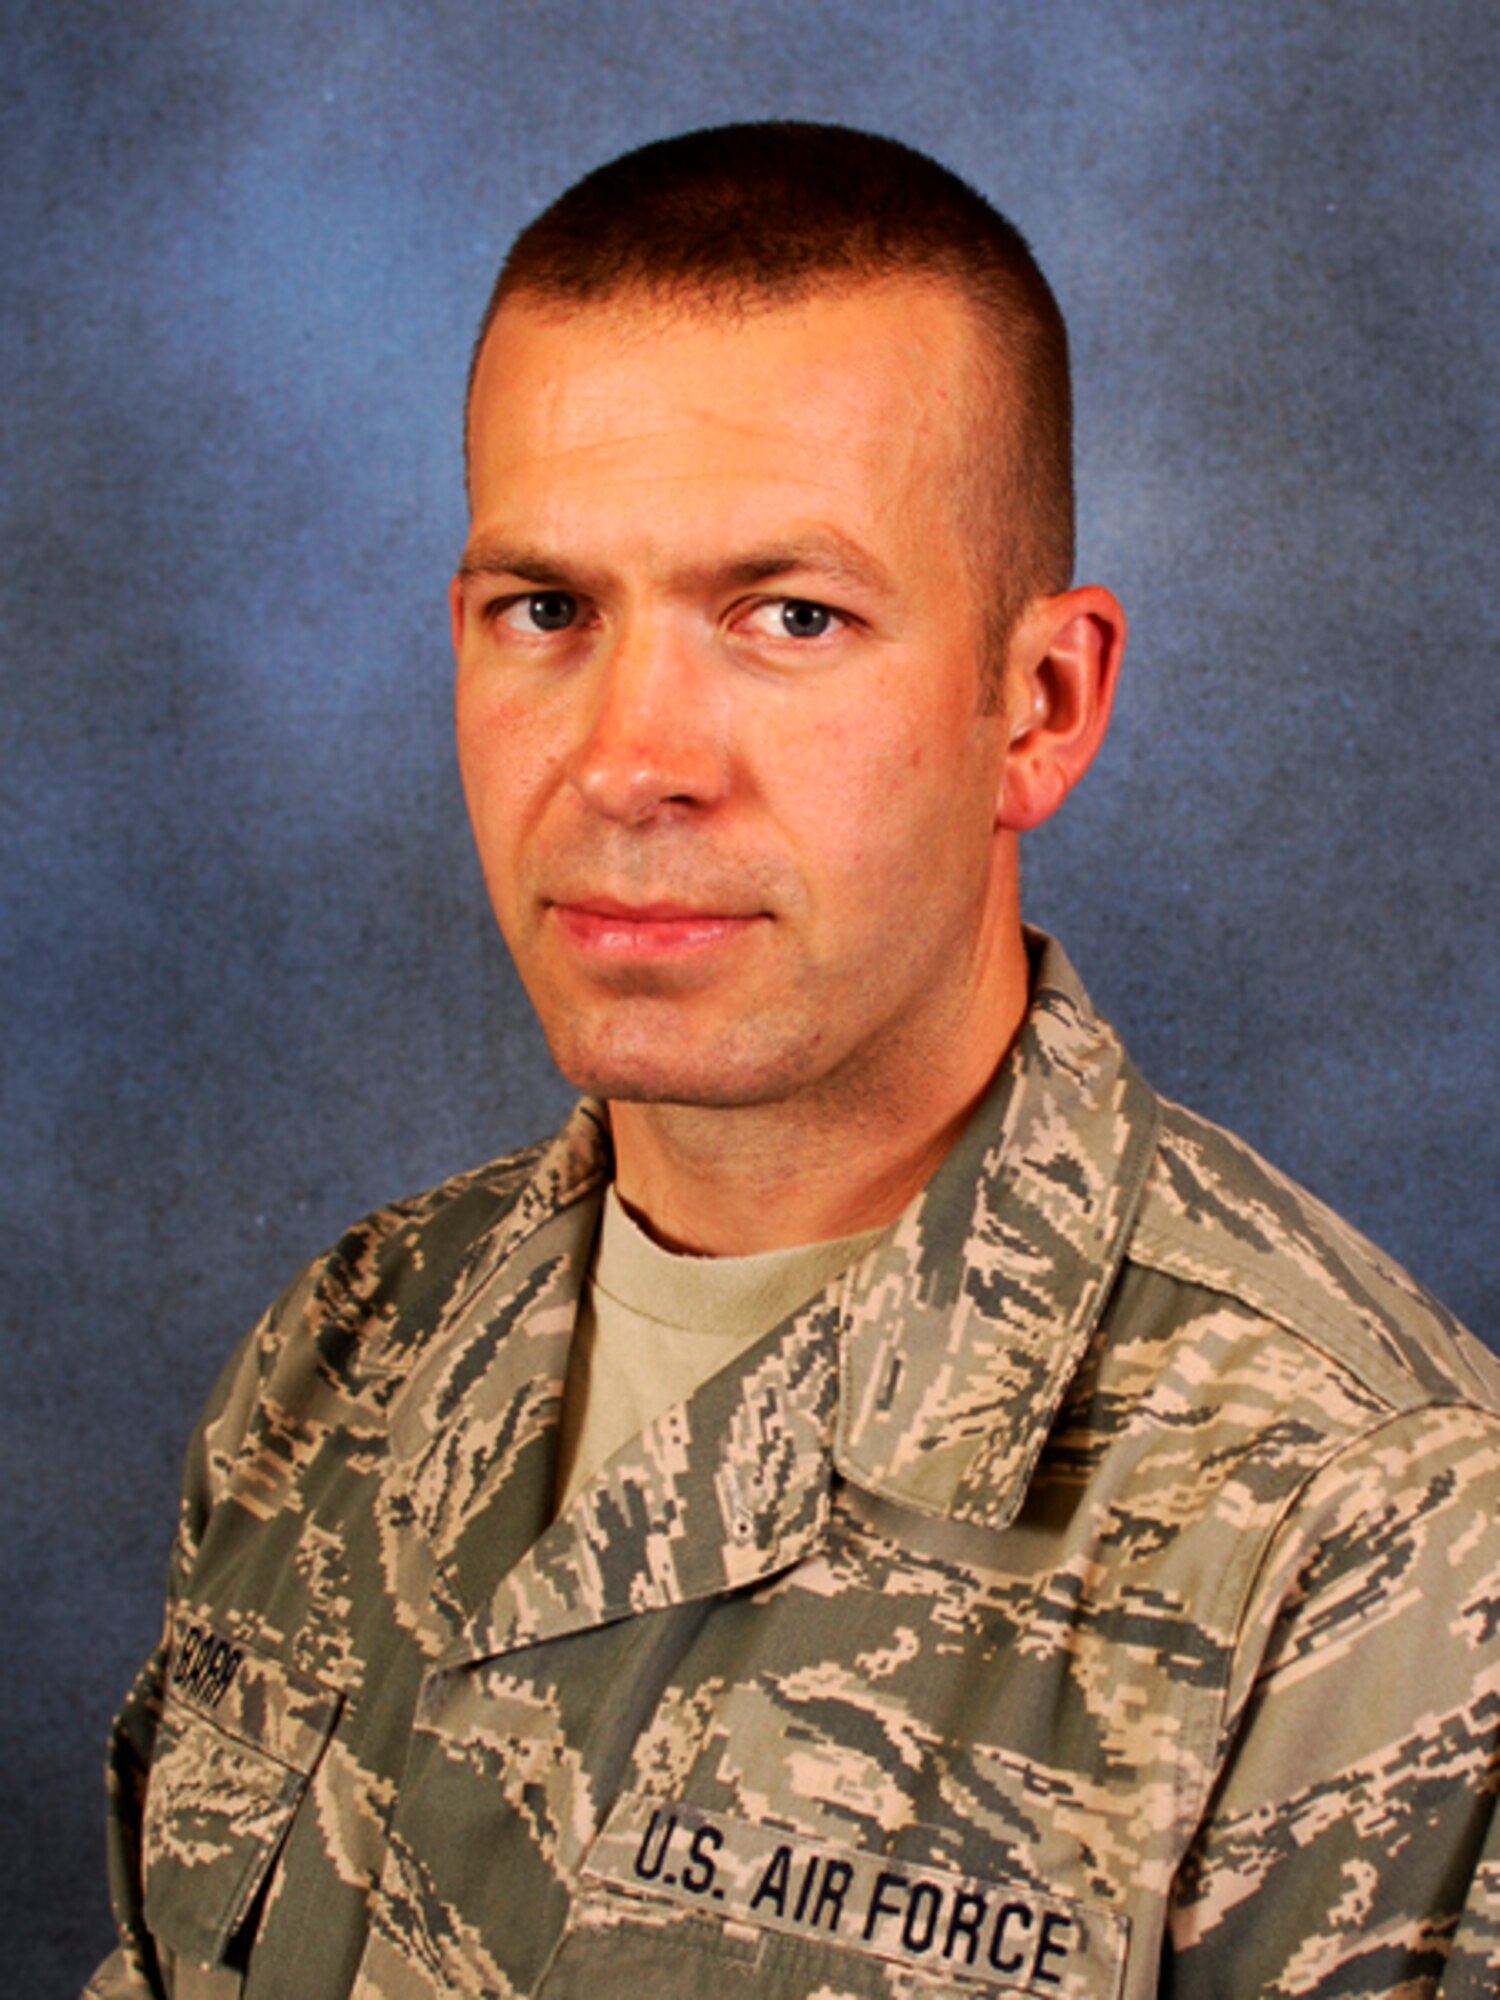 The 188th Wing’s Barr family - Senior Master Sgt. Scott Barr (pictured in this photo), his wife Cindy and the couples’ children - were awarded National Military Family Association 2014 Family of the Year Award for the Air National Guard. Gen. Frank Grass, chief of the National Guard, left, and Maj. Gen. William Wofford, Arkansas National Guard adjutant general, right, presented the accolade to the Barrs at the national volunteer conference in Norman, Oklahoma, Aug. 13. (Courtesy photo/released)